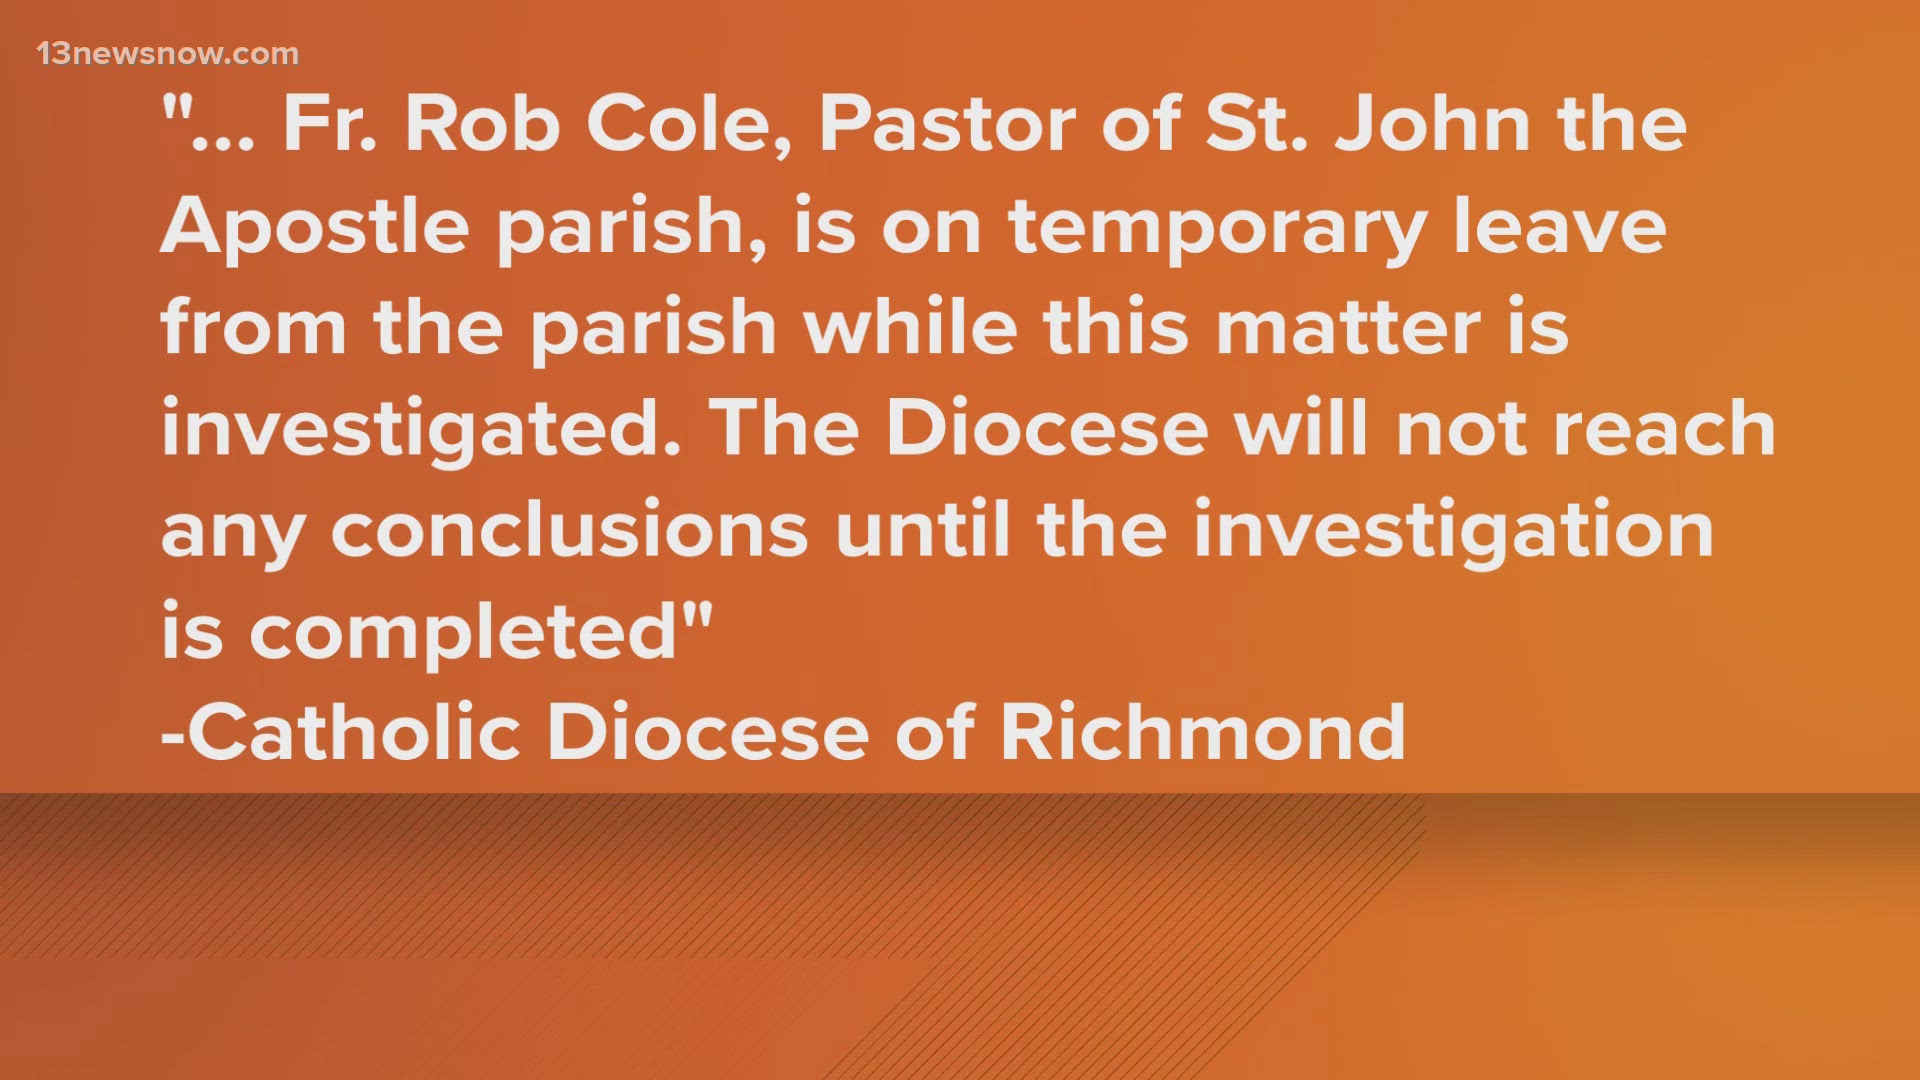 The Catholic Diocese of Richmond released a statement saying they learned about the alleged abuse at St. John the Apostle Catholic School in Virginia Beach.